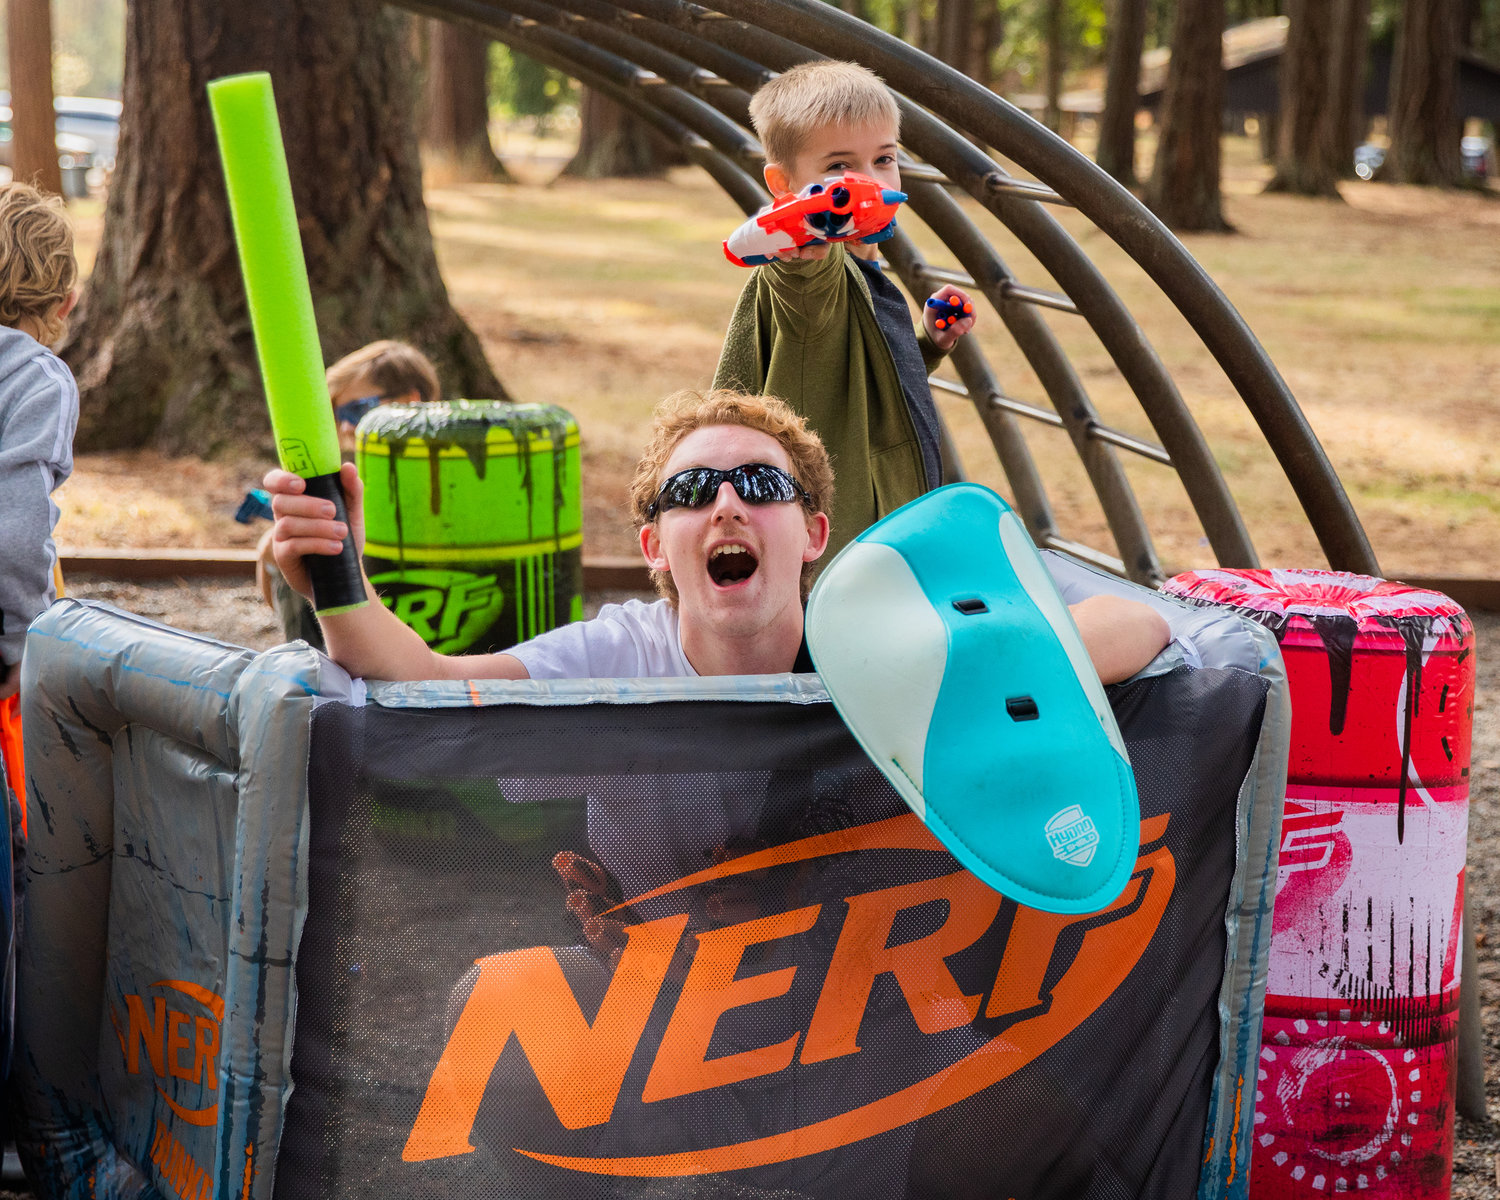 Nerf blasters and foam swords are held up in battle at Borst Park on Sunday.